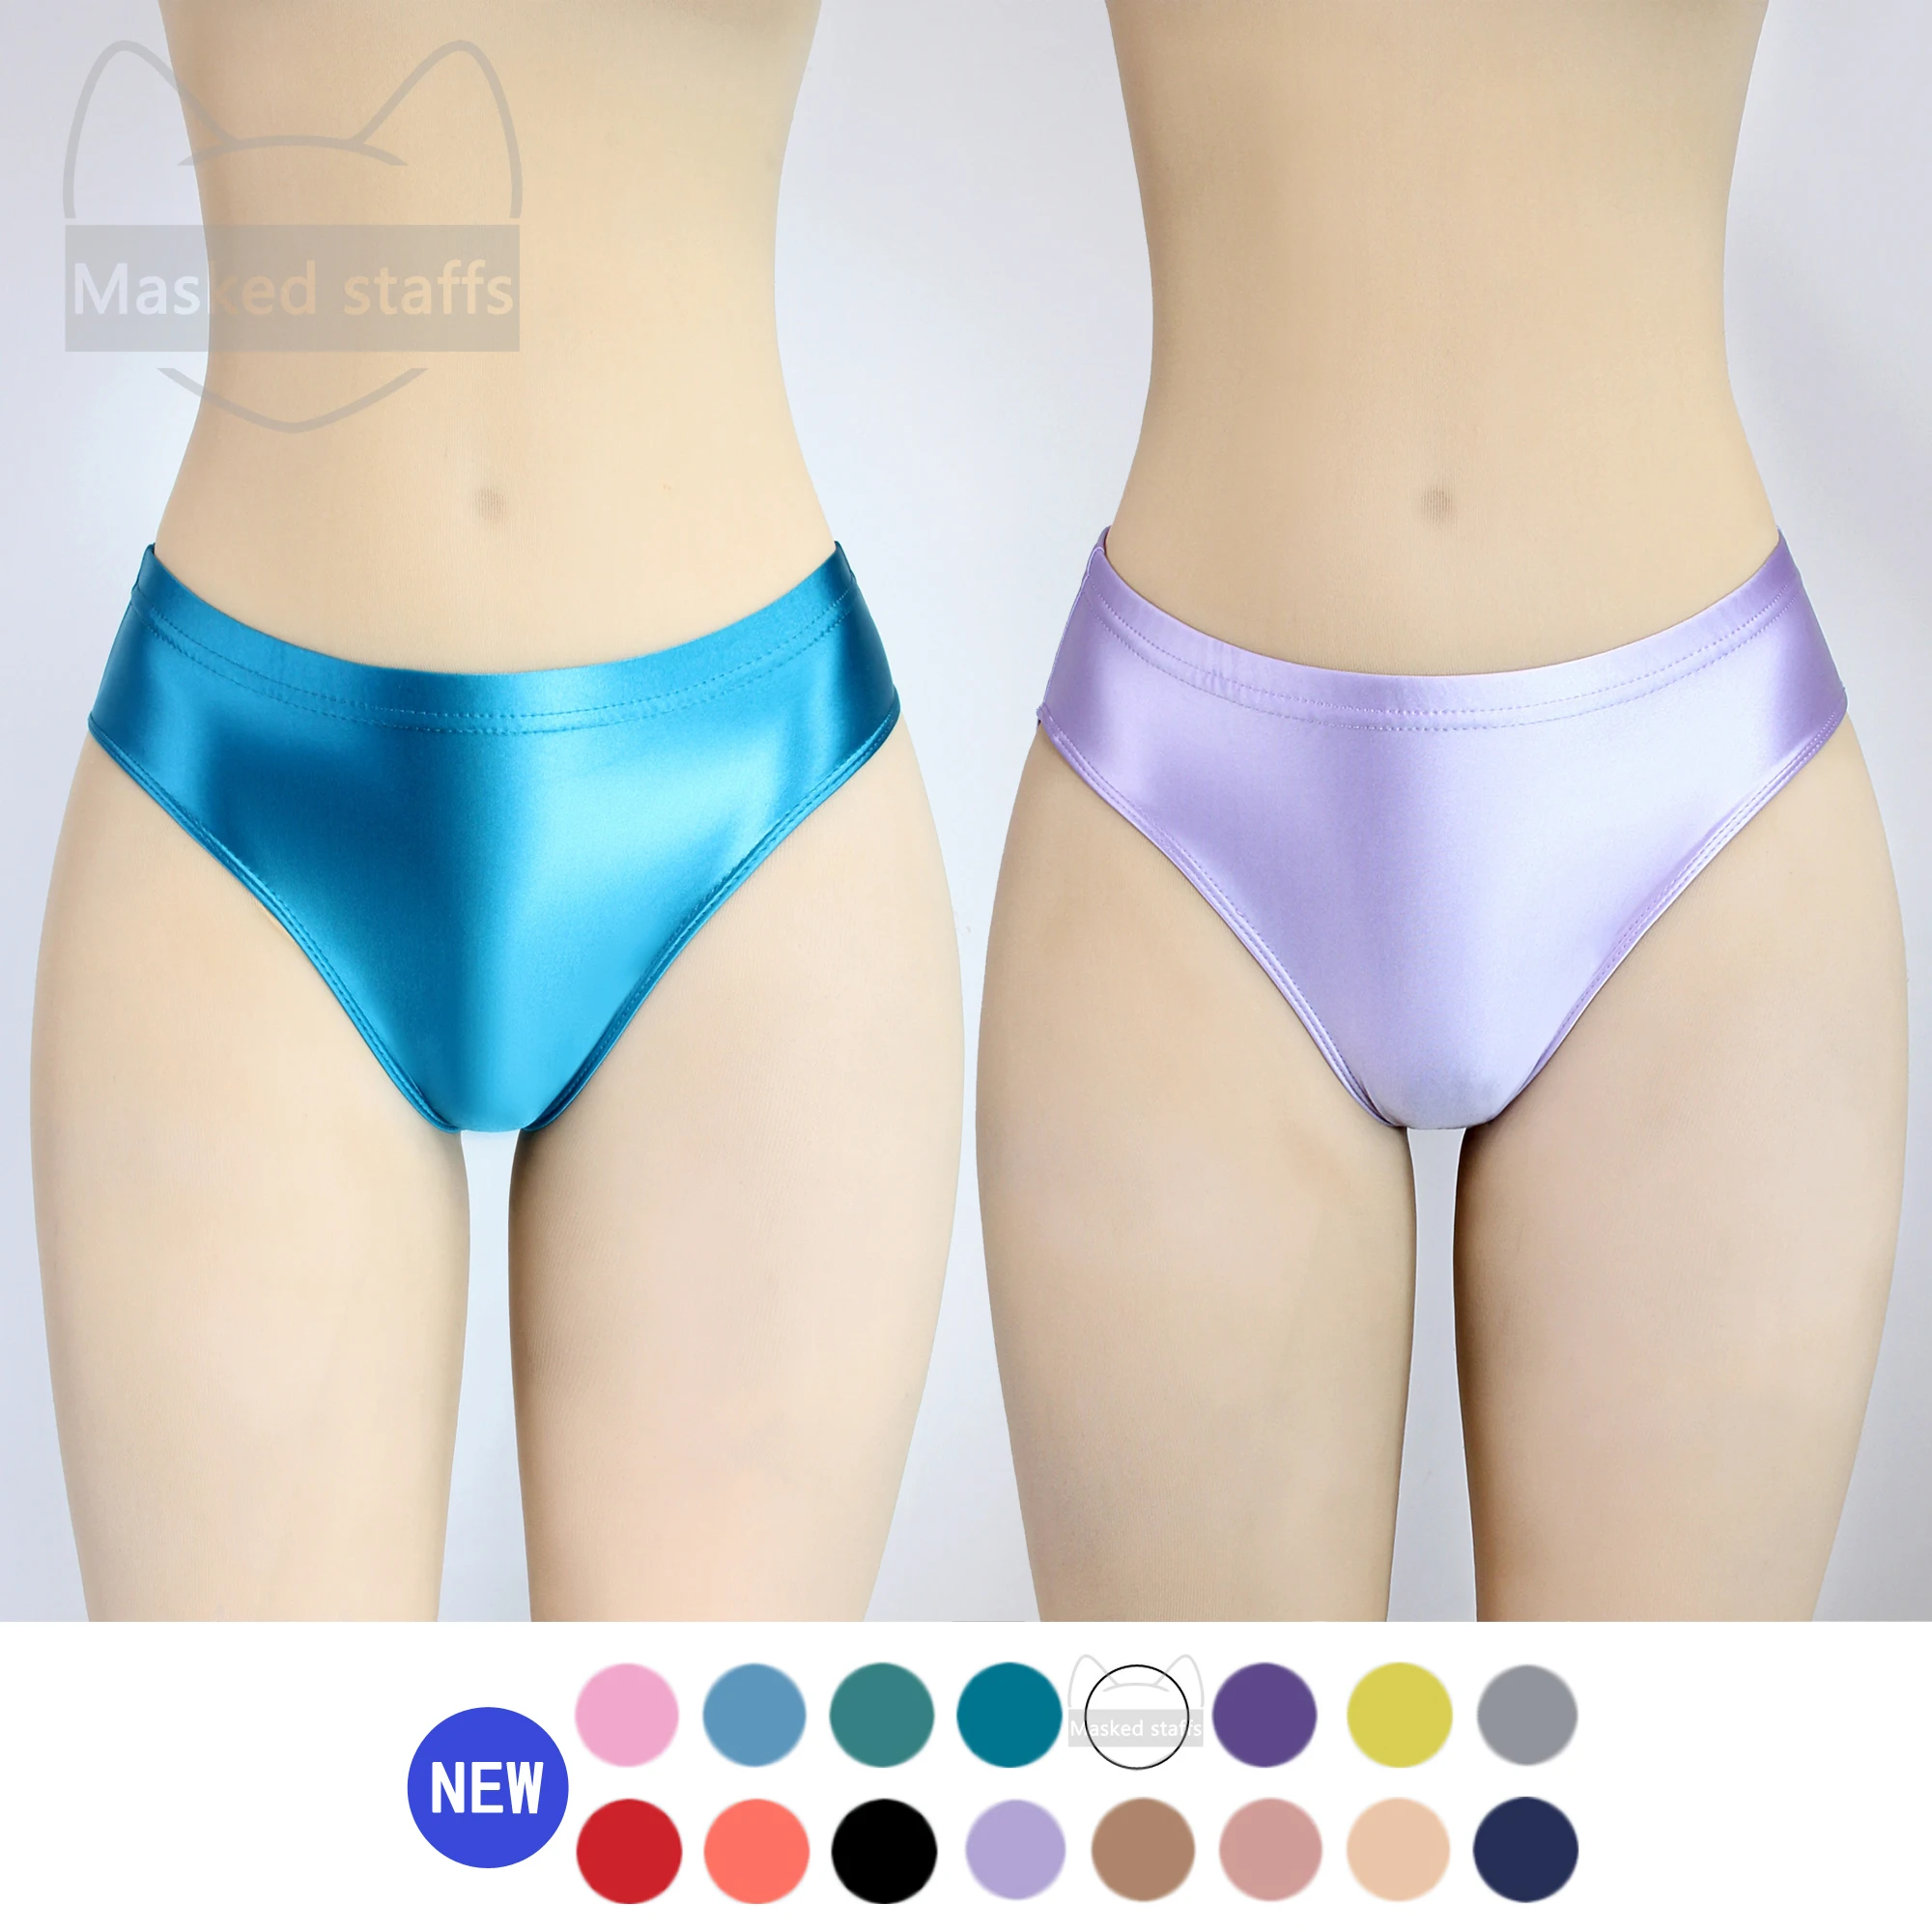 

Masked staffs glossy briefs pants with buttocks sexy Silky solid bikini low-waist tights underpants and high fork Oily briefs